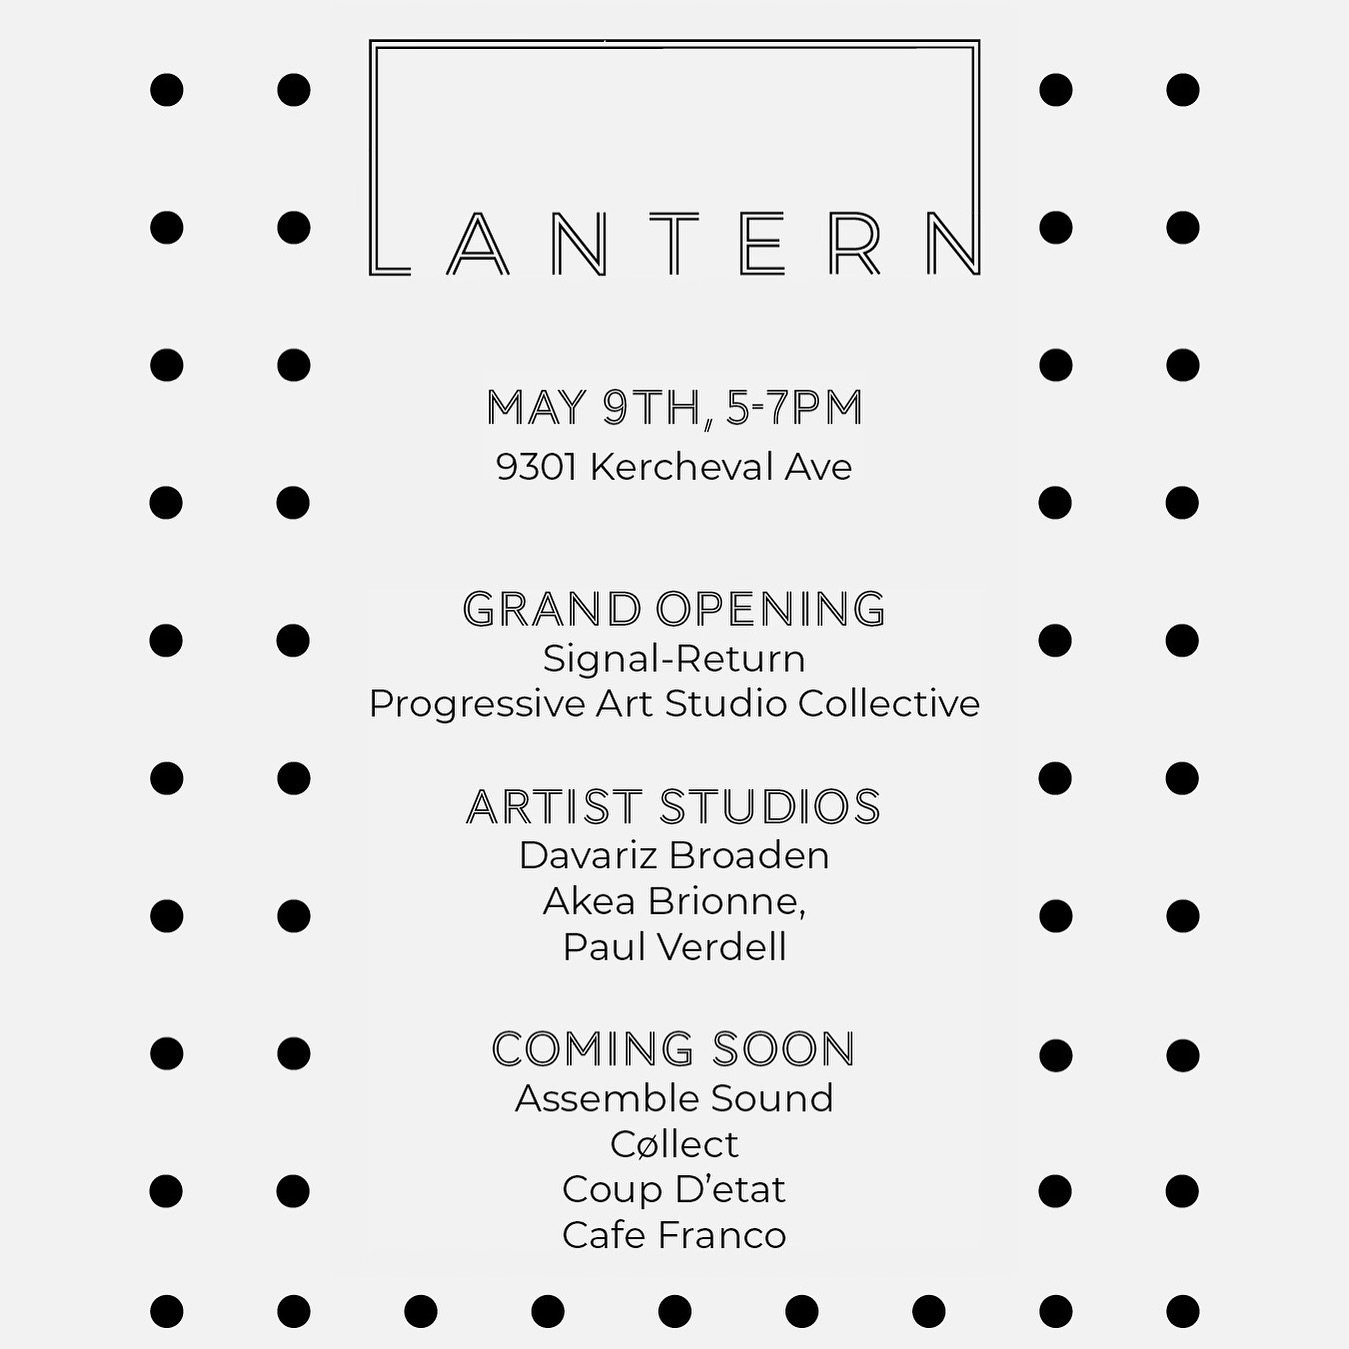 &ldquo;Join us in celebrating the grand opening of @SignalReturn and @ProgressiveArtStudioCollective this Thursday, May 9th from 5-7pm at @LANTERNdetroit!&rdquo;

The celebration will include a look into the future spaces of @Collect.BeerBar, @YoureS